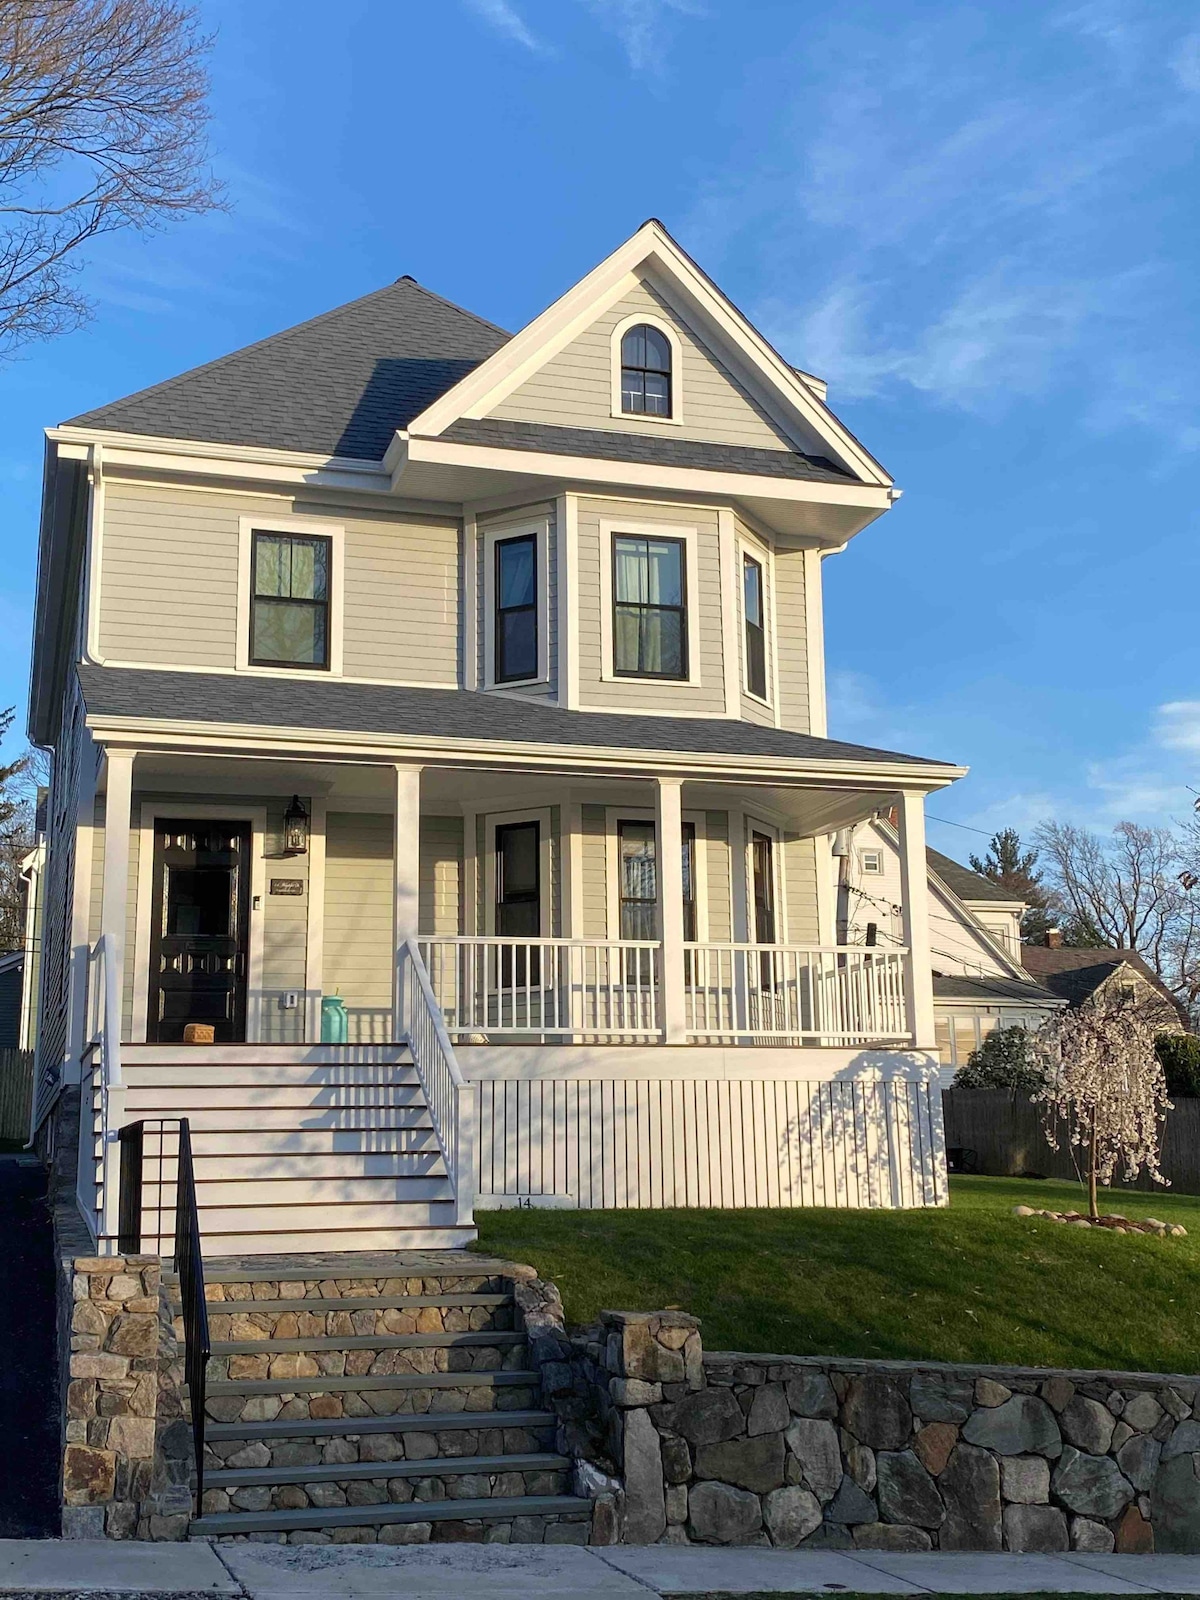 The 1880 House: Historic Single Family Victorian!